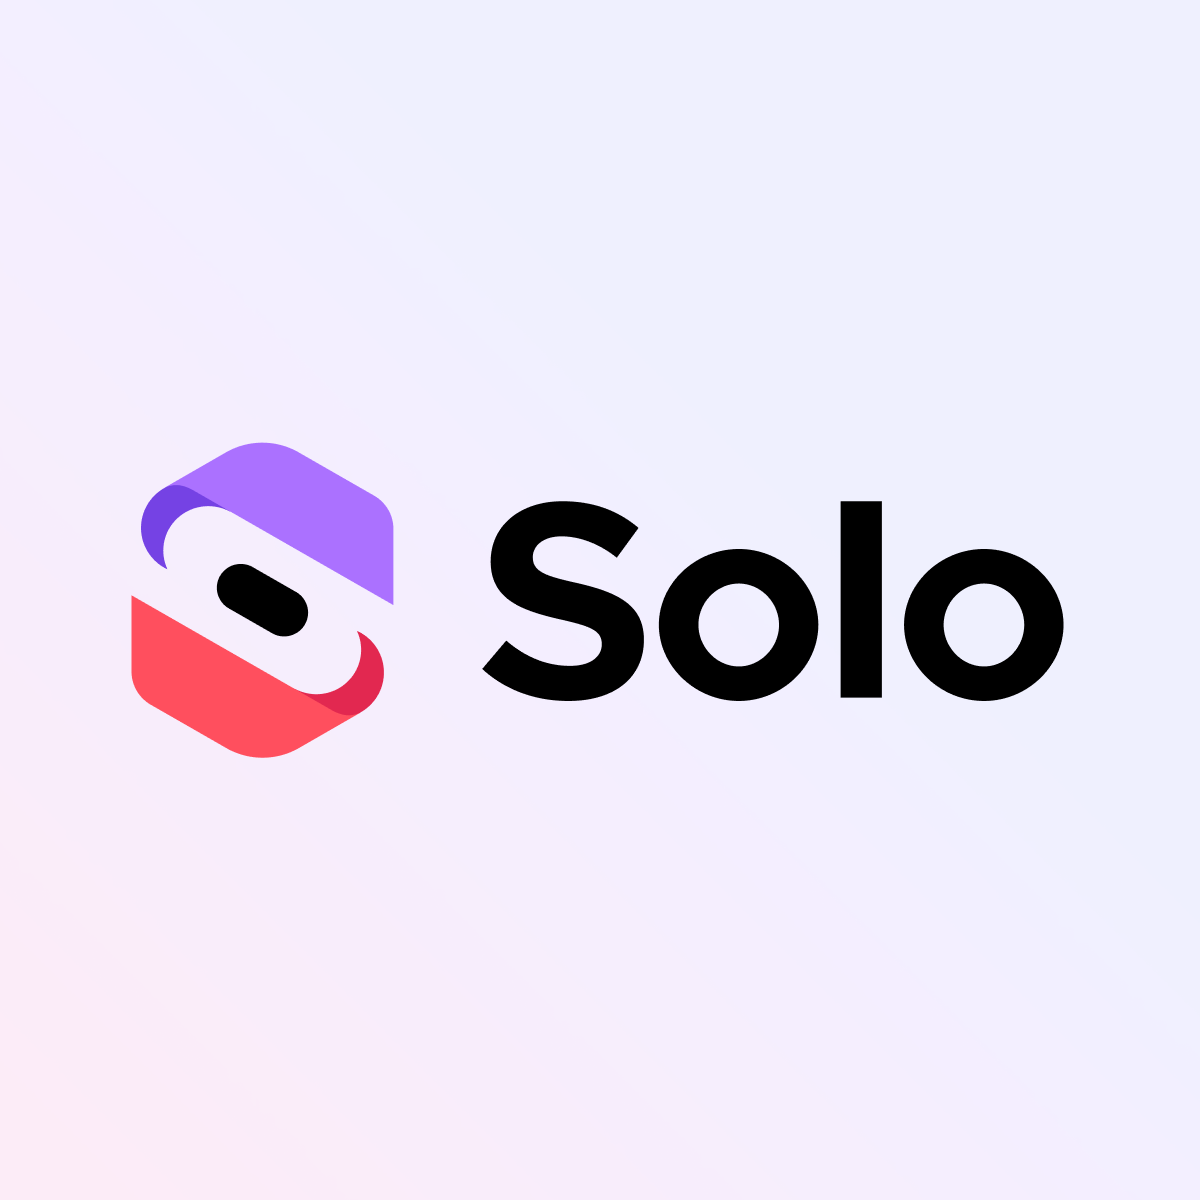 An image of the Solo logo and wordmark.